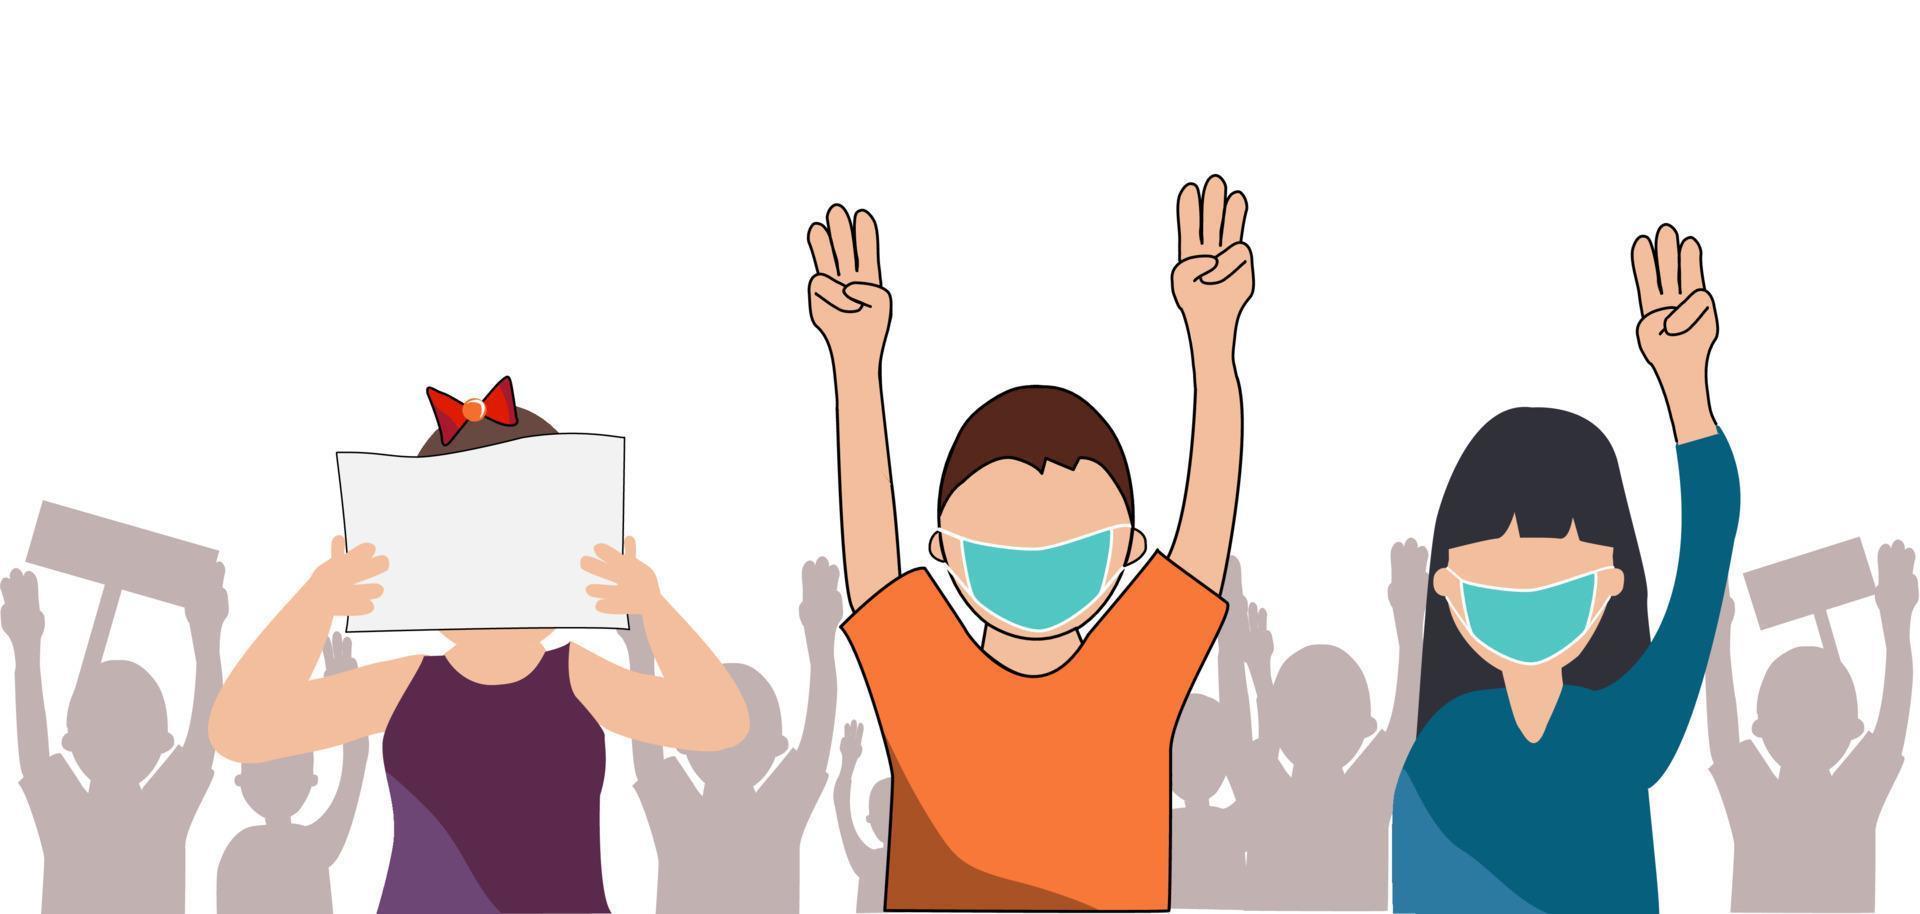 Crowd of people wearing surgical face mask show 3 fingers protesting. Protest, outcry, deprecation concept. Cartoon vector illustration